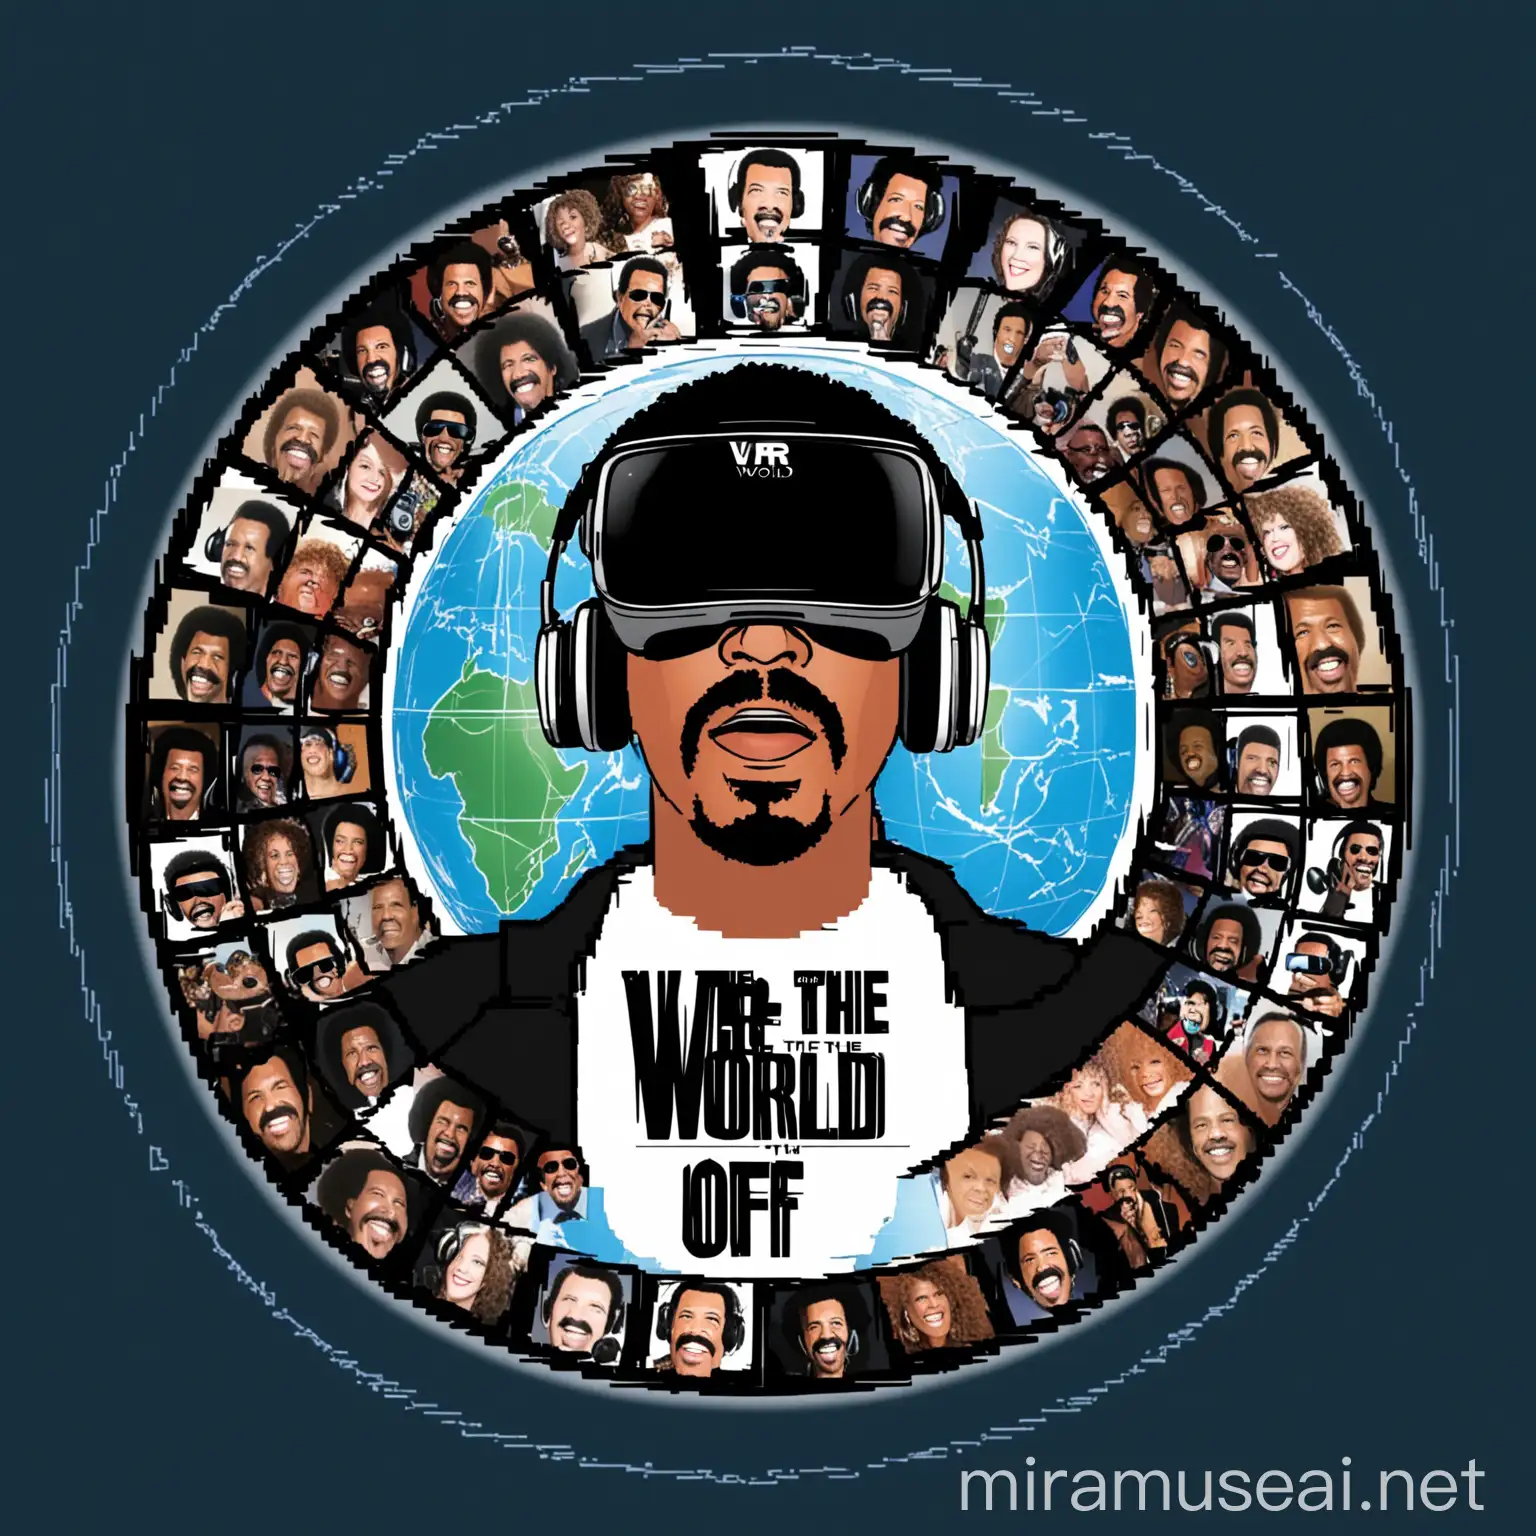 "USA For Africa - We Are The World" song album picture with Lionel Richie with big virtual reality glass and microfon and headphone, without background, as a logo in circle shape, with a title around the pic: "VR the World"